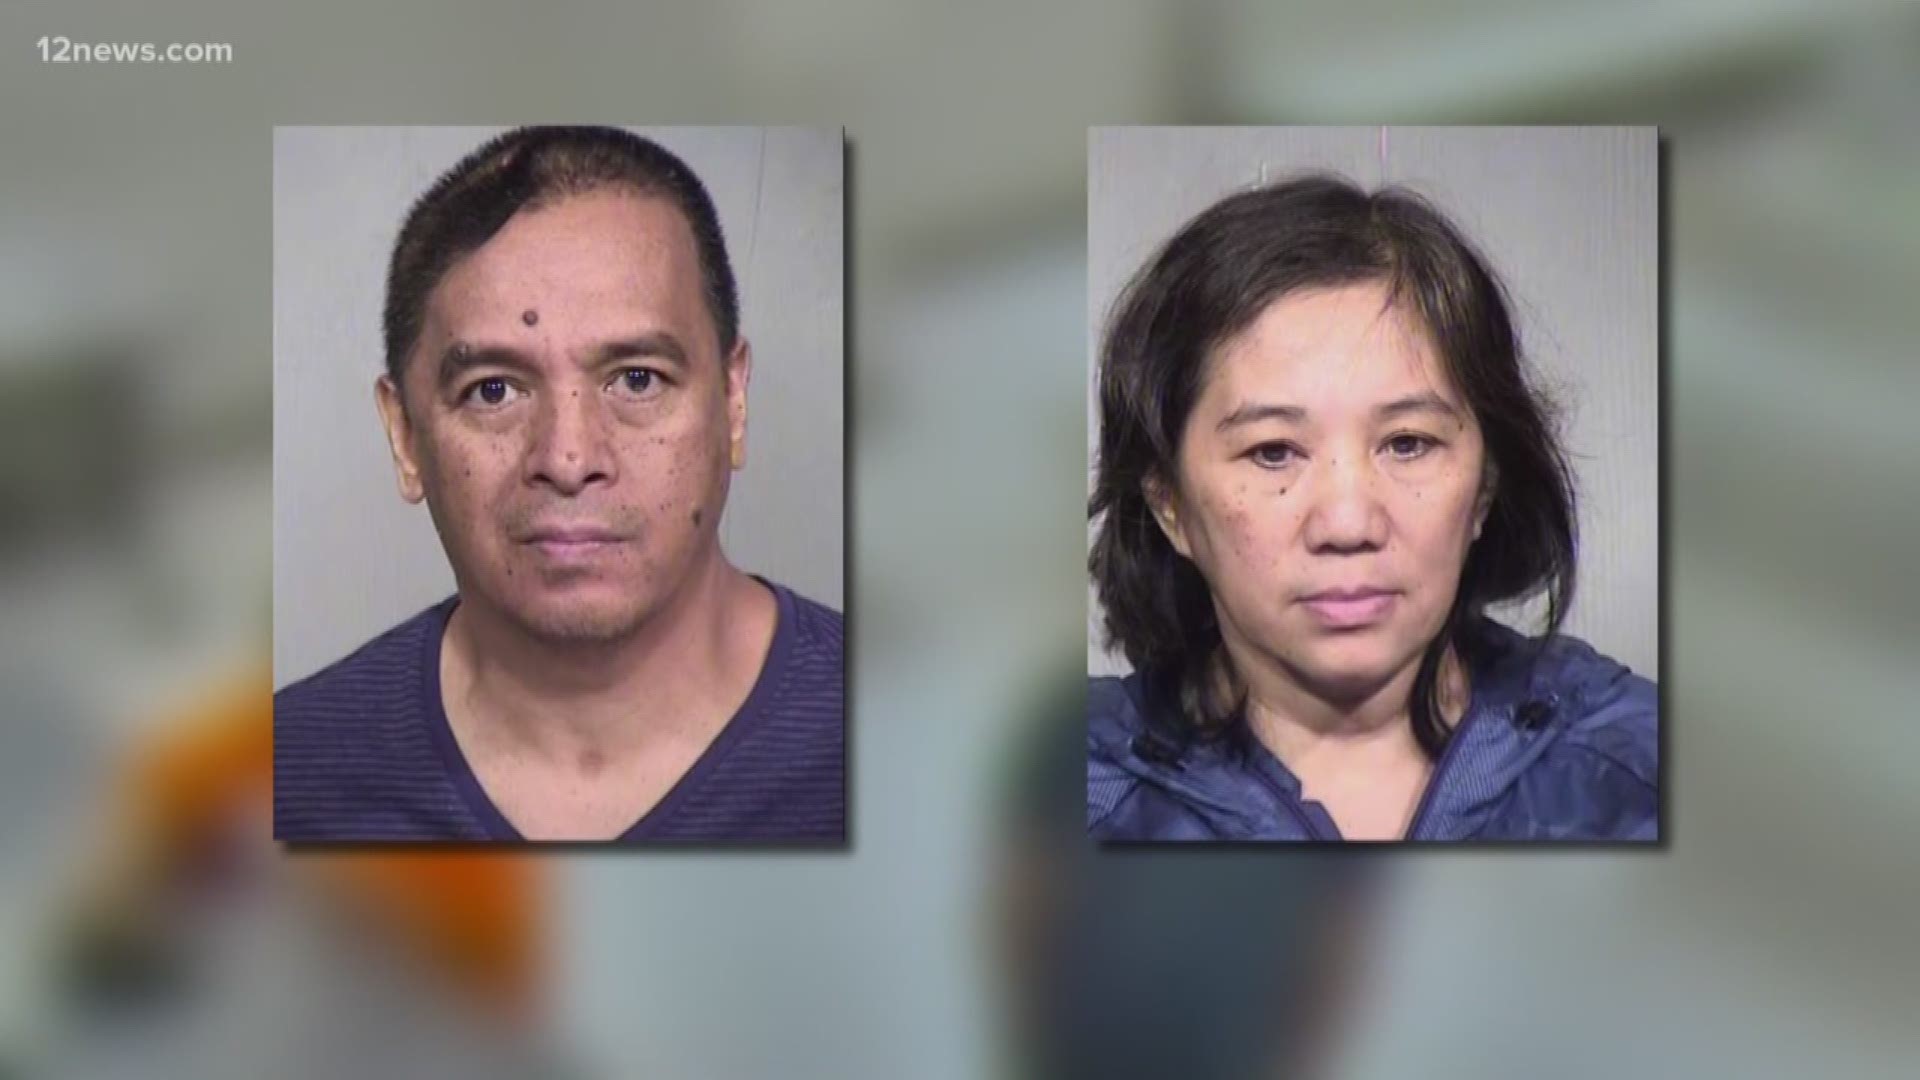 Joseph and Lolita Somera were indicted on one count each of vulnerable adult abuse. A 69-year-old patient in their care at a Chandler assisted-living facility died in August of 2018 from a combination of his health and heat-related issues. Police recorded his room was 100 degrees when they responded to the assisted-living facility.